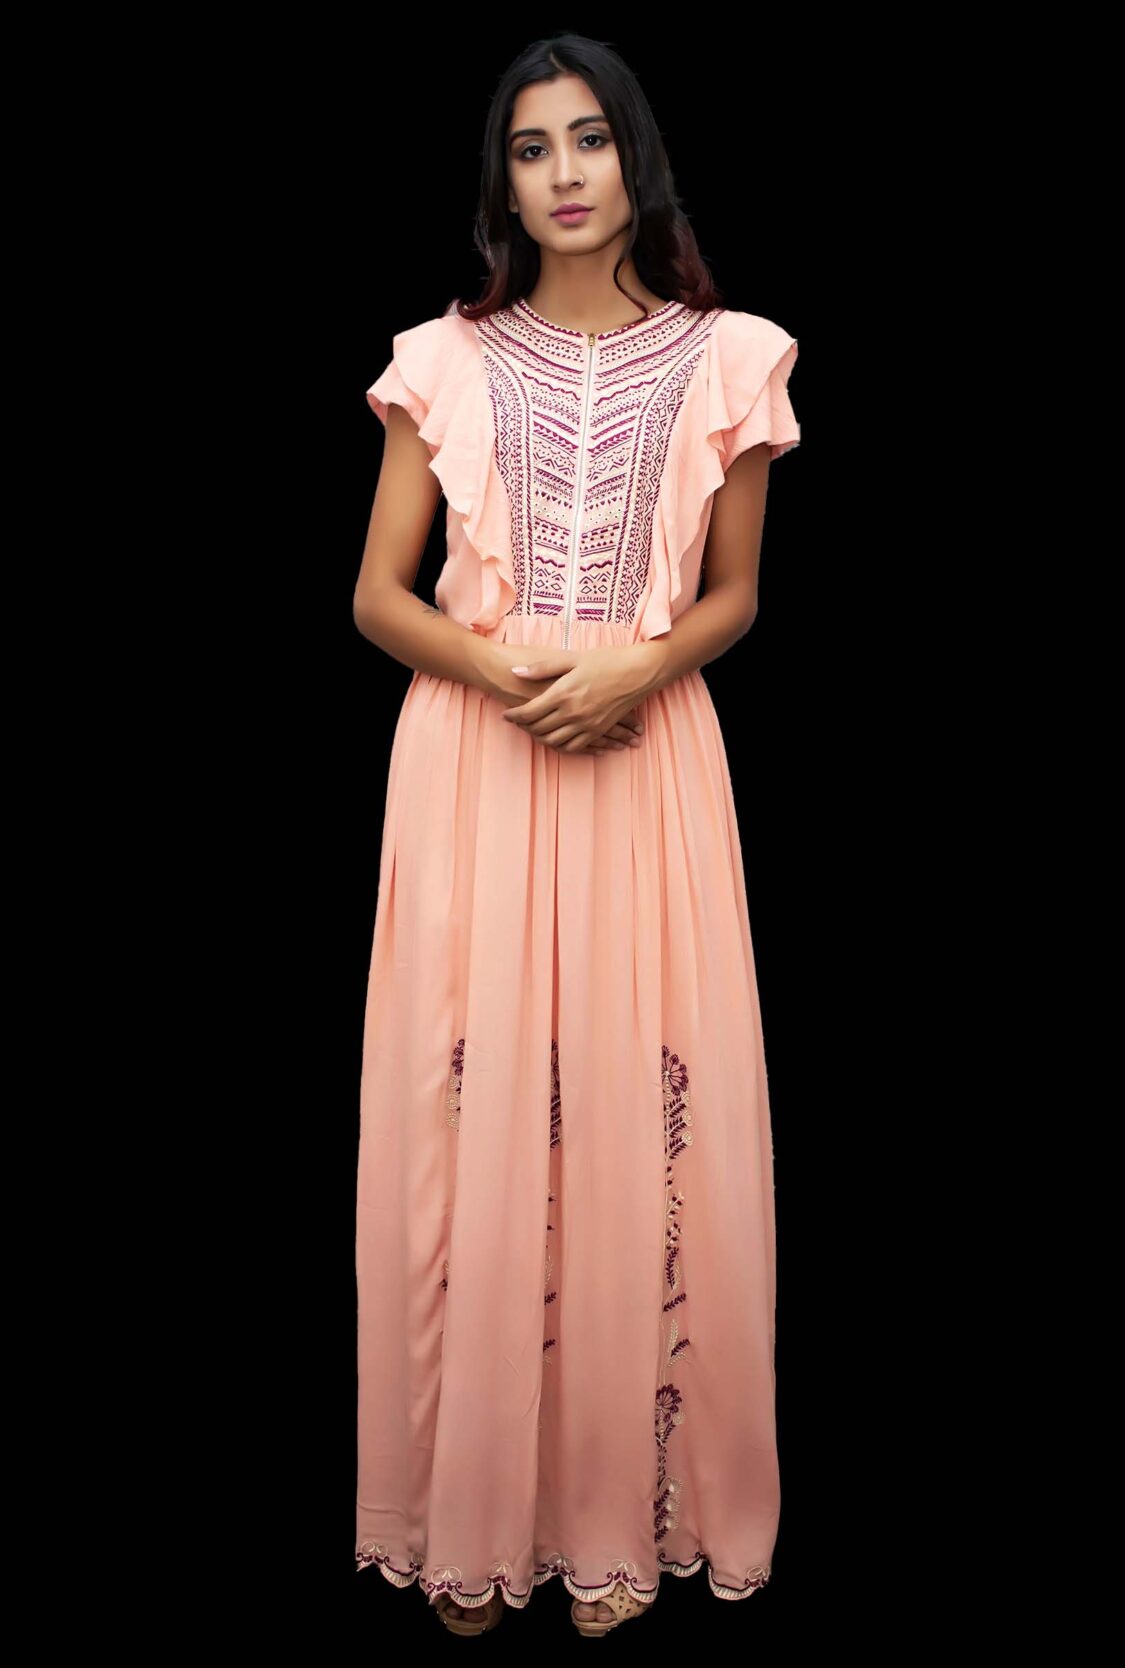 Buy Embroidered Cotton Maxi Dress Online in Canada - India - USA At Folklore Collections | Buy Embroidered Dresses Online in Toronto - Delhi At Folklore